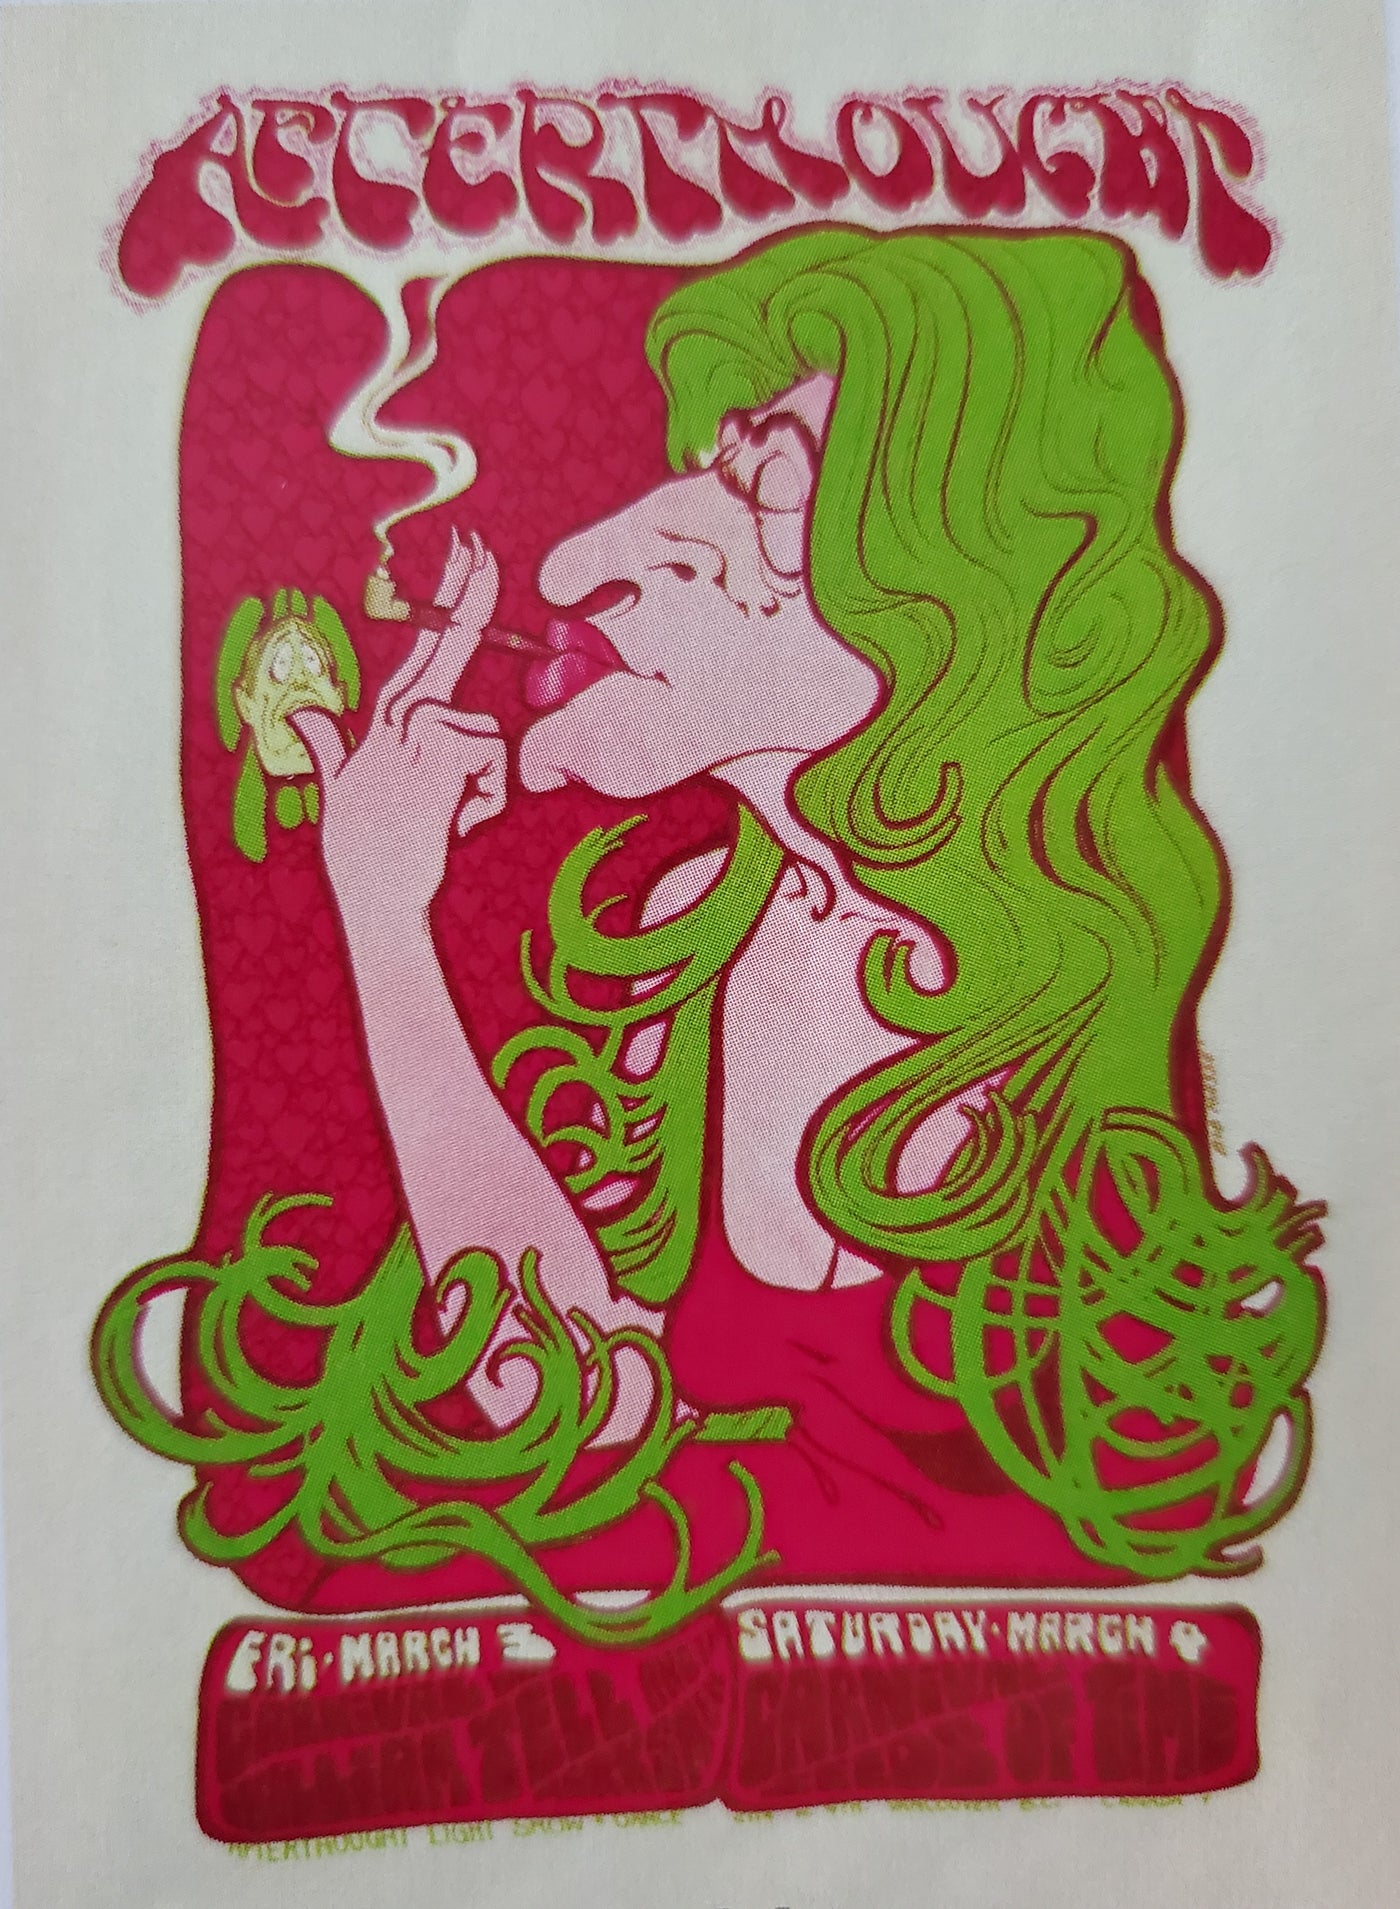 Afterthought Poster A44 Lady Green Hair, Smoking